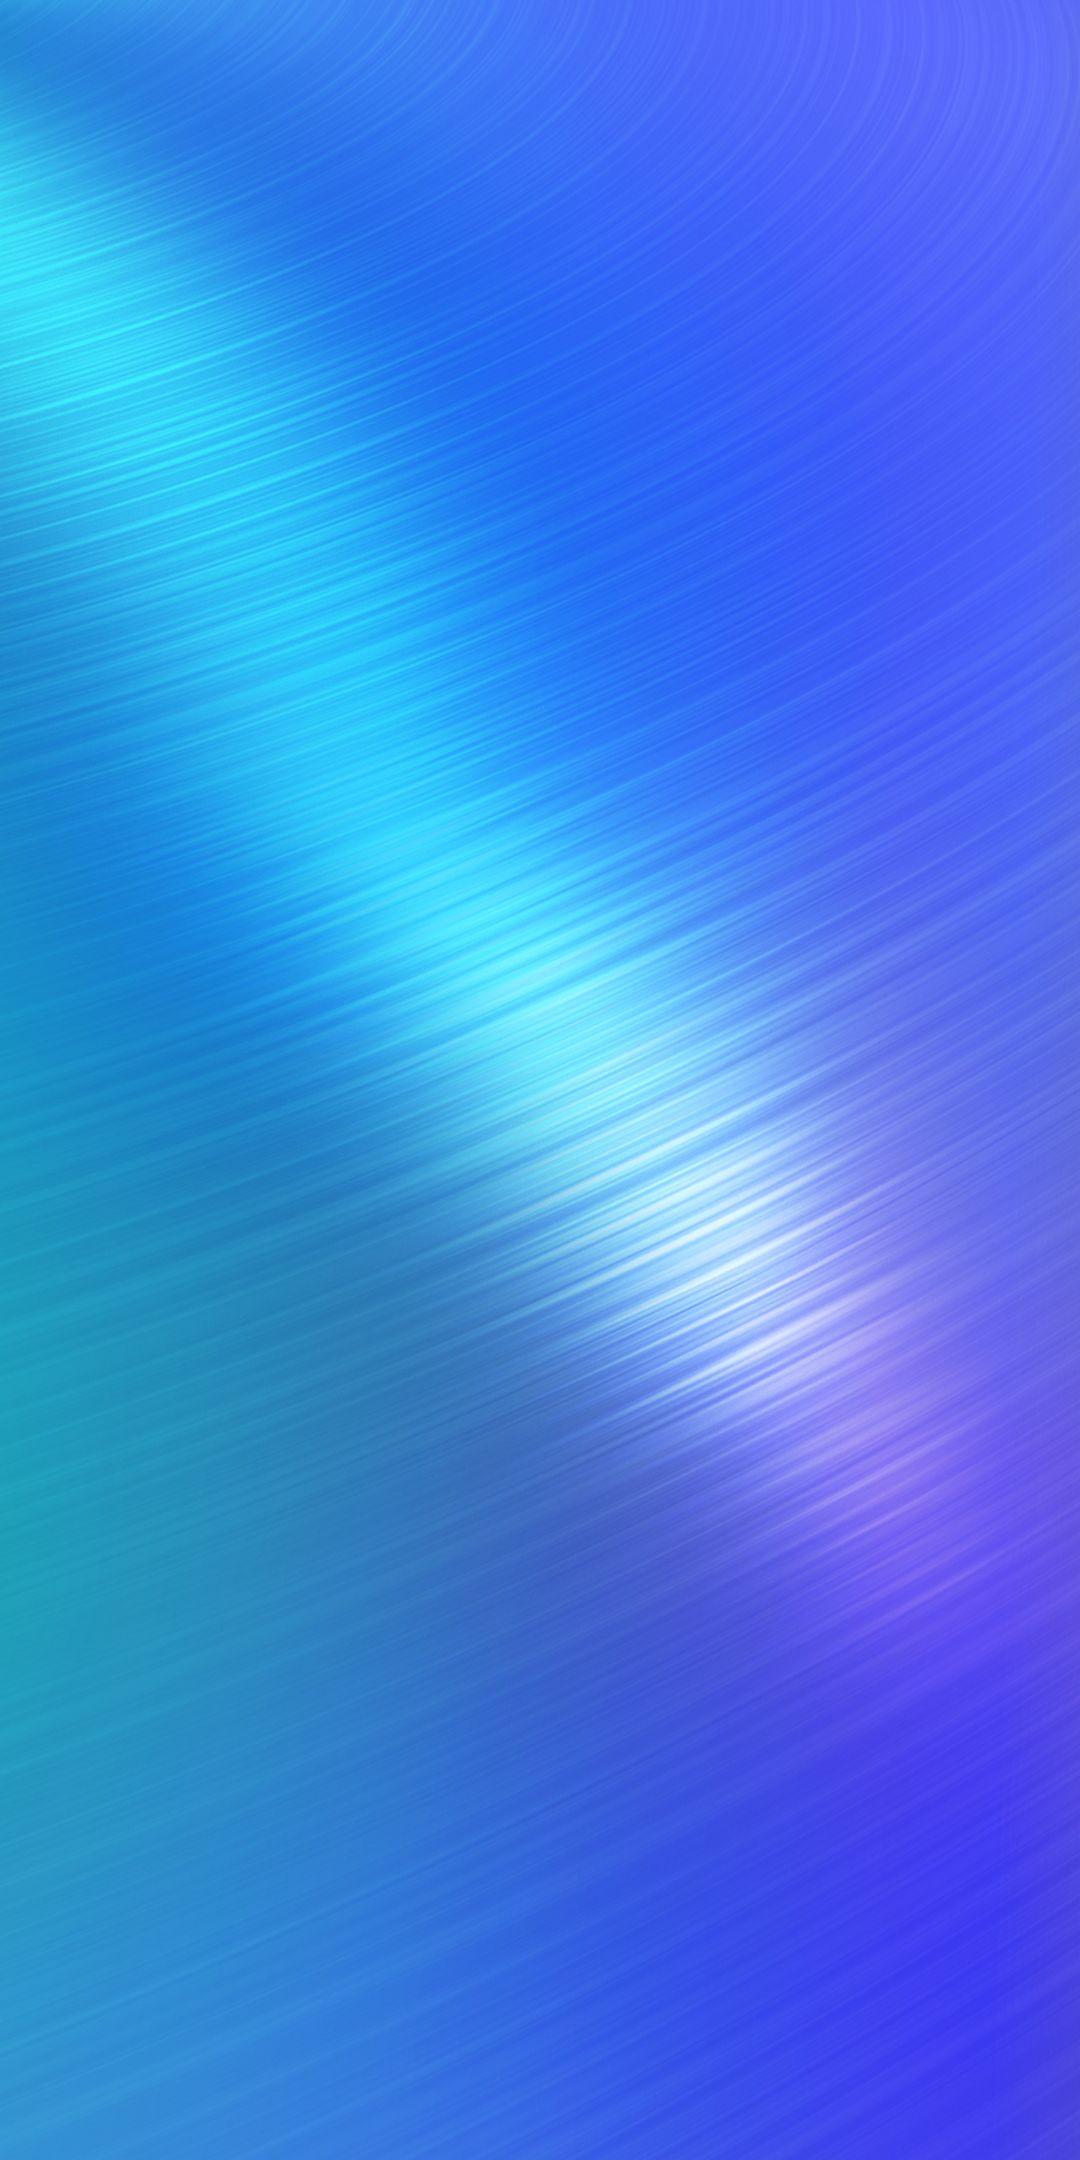 OnePlus 5T Wallpaper with Blue Waves in Abstract. HD Wallpaper